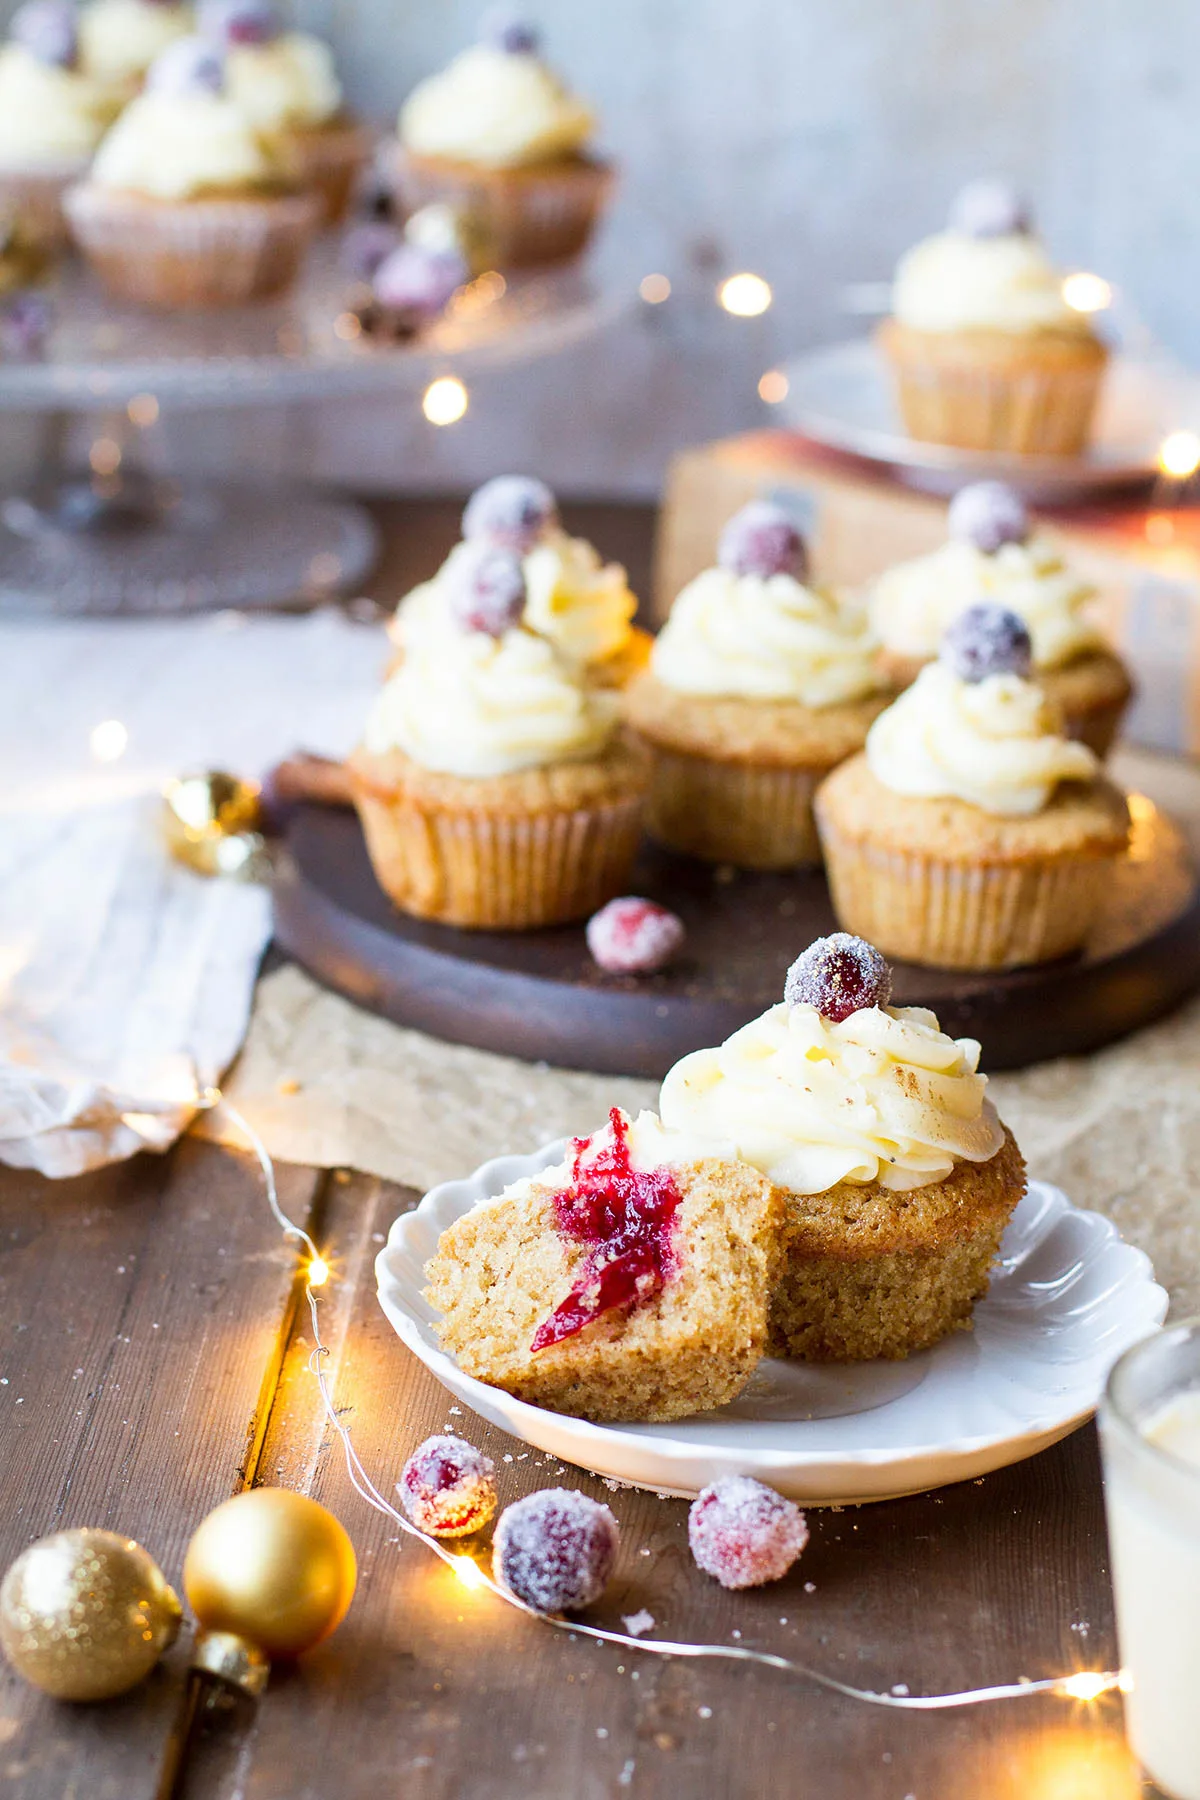 One whole and one half cupcake on a small plate, to show the cranberry sauce inside.